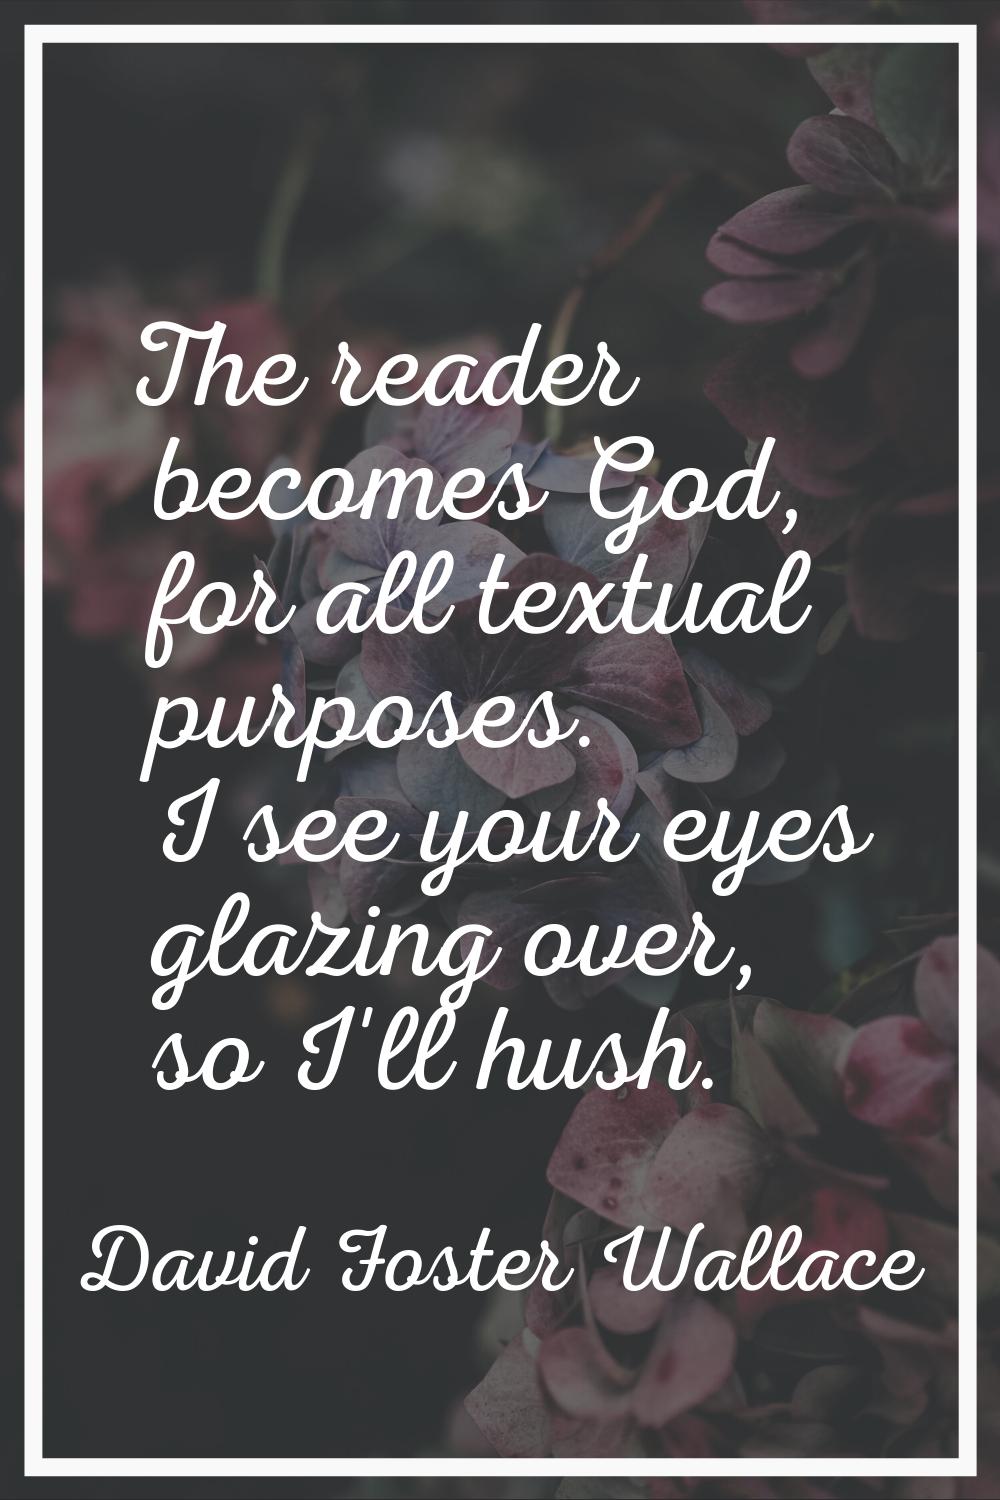 The reader becomes God, for all textual purposes. I see your eyes glazing over, so I'll hush.